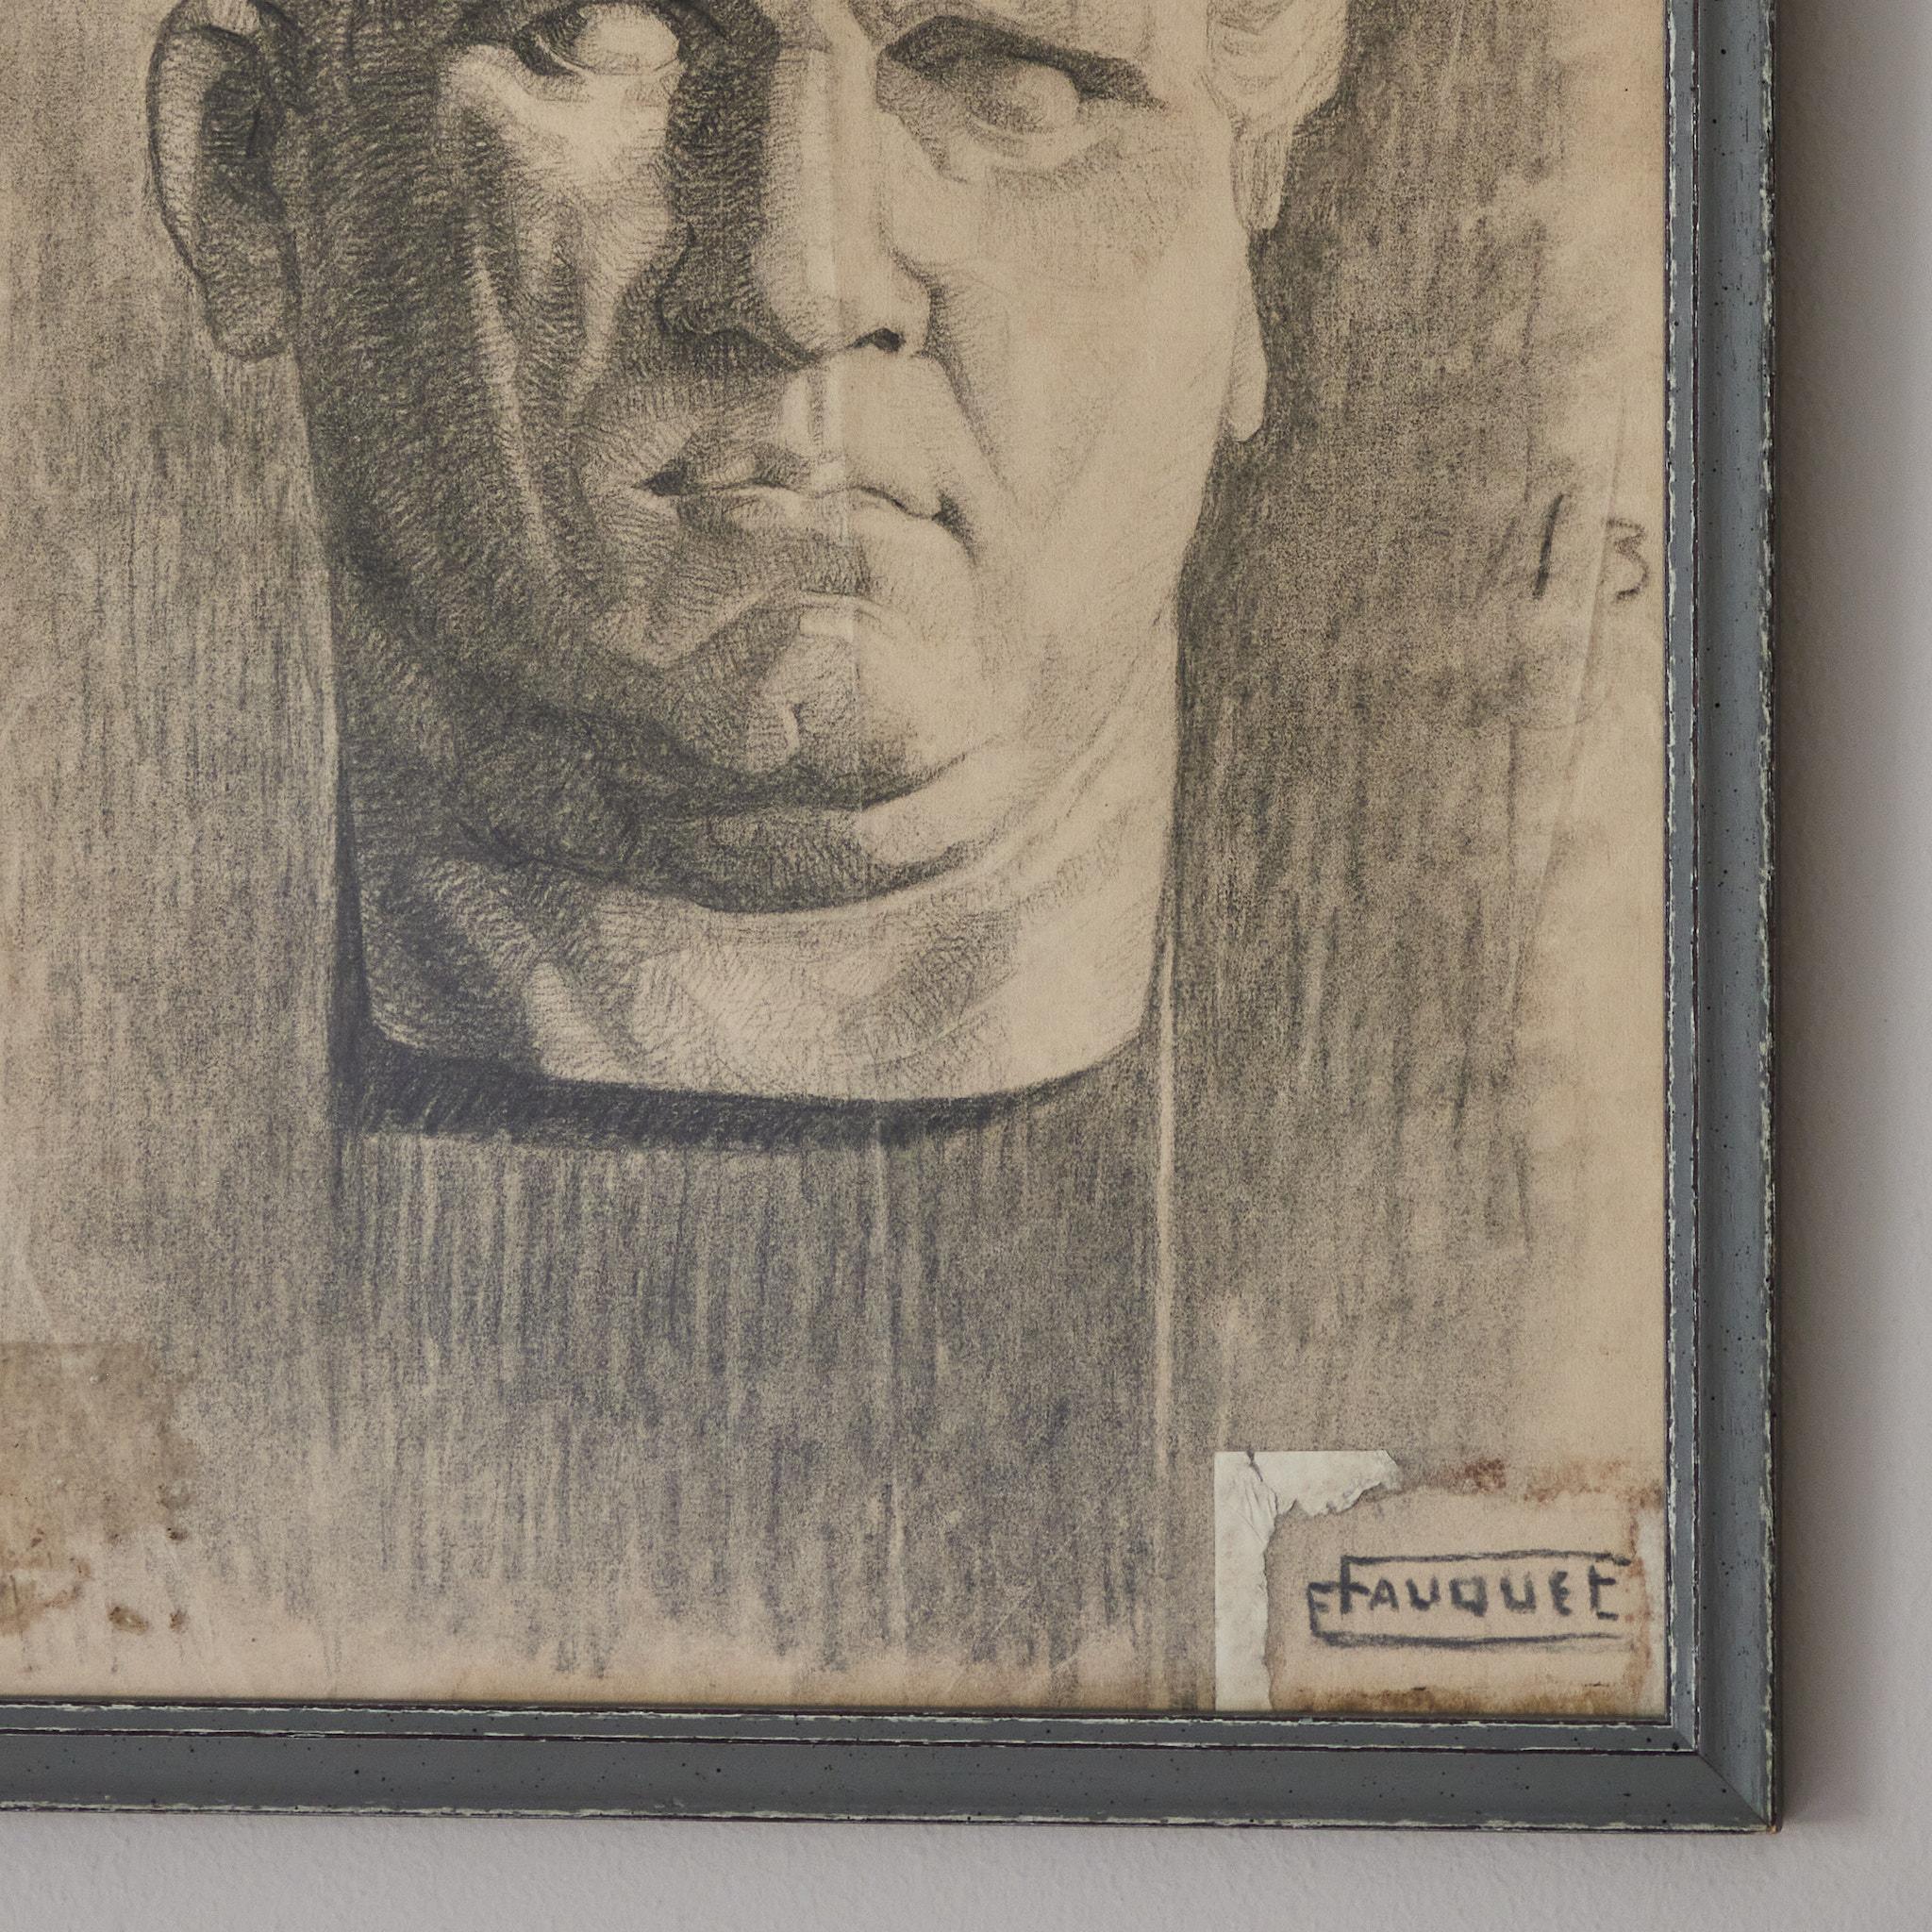 Signed charcoal pencil drawing of a Roman bust from late 19th-century France, mounted in a thin gray painted wooden frame. With its academic classicism and impeccable attention to detail, the piece is compelling for the way it depicts both art and